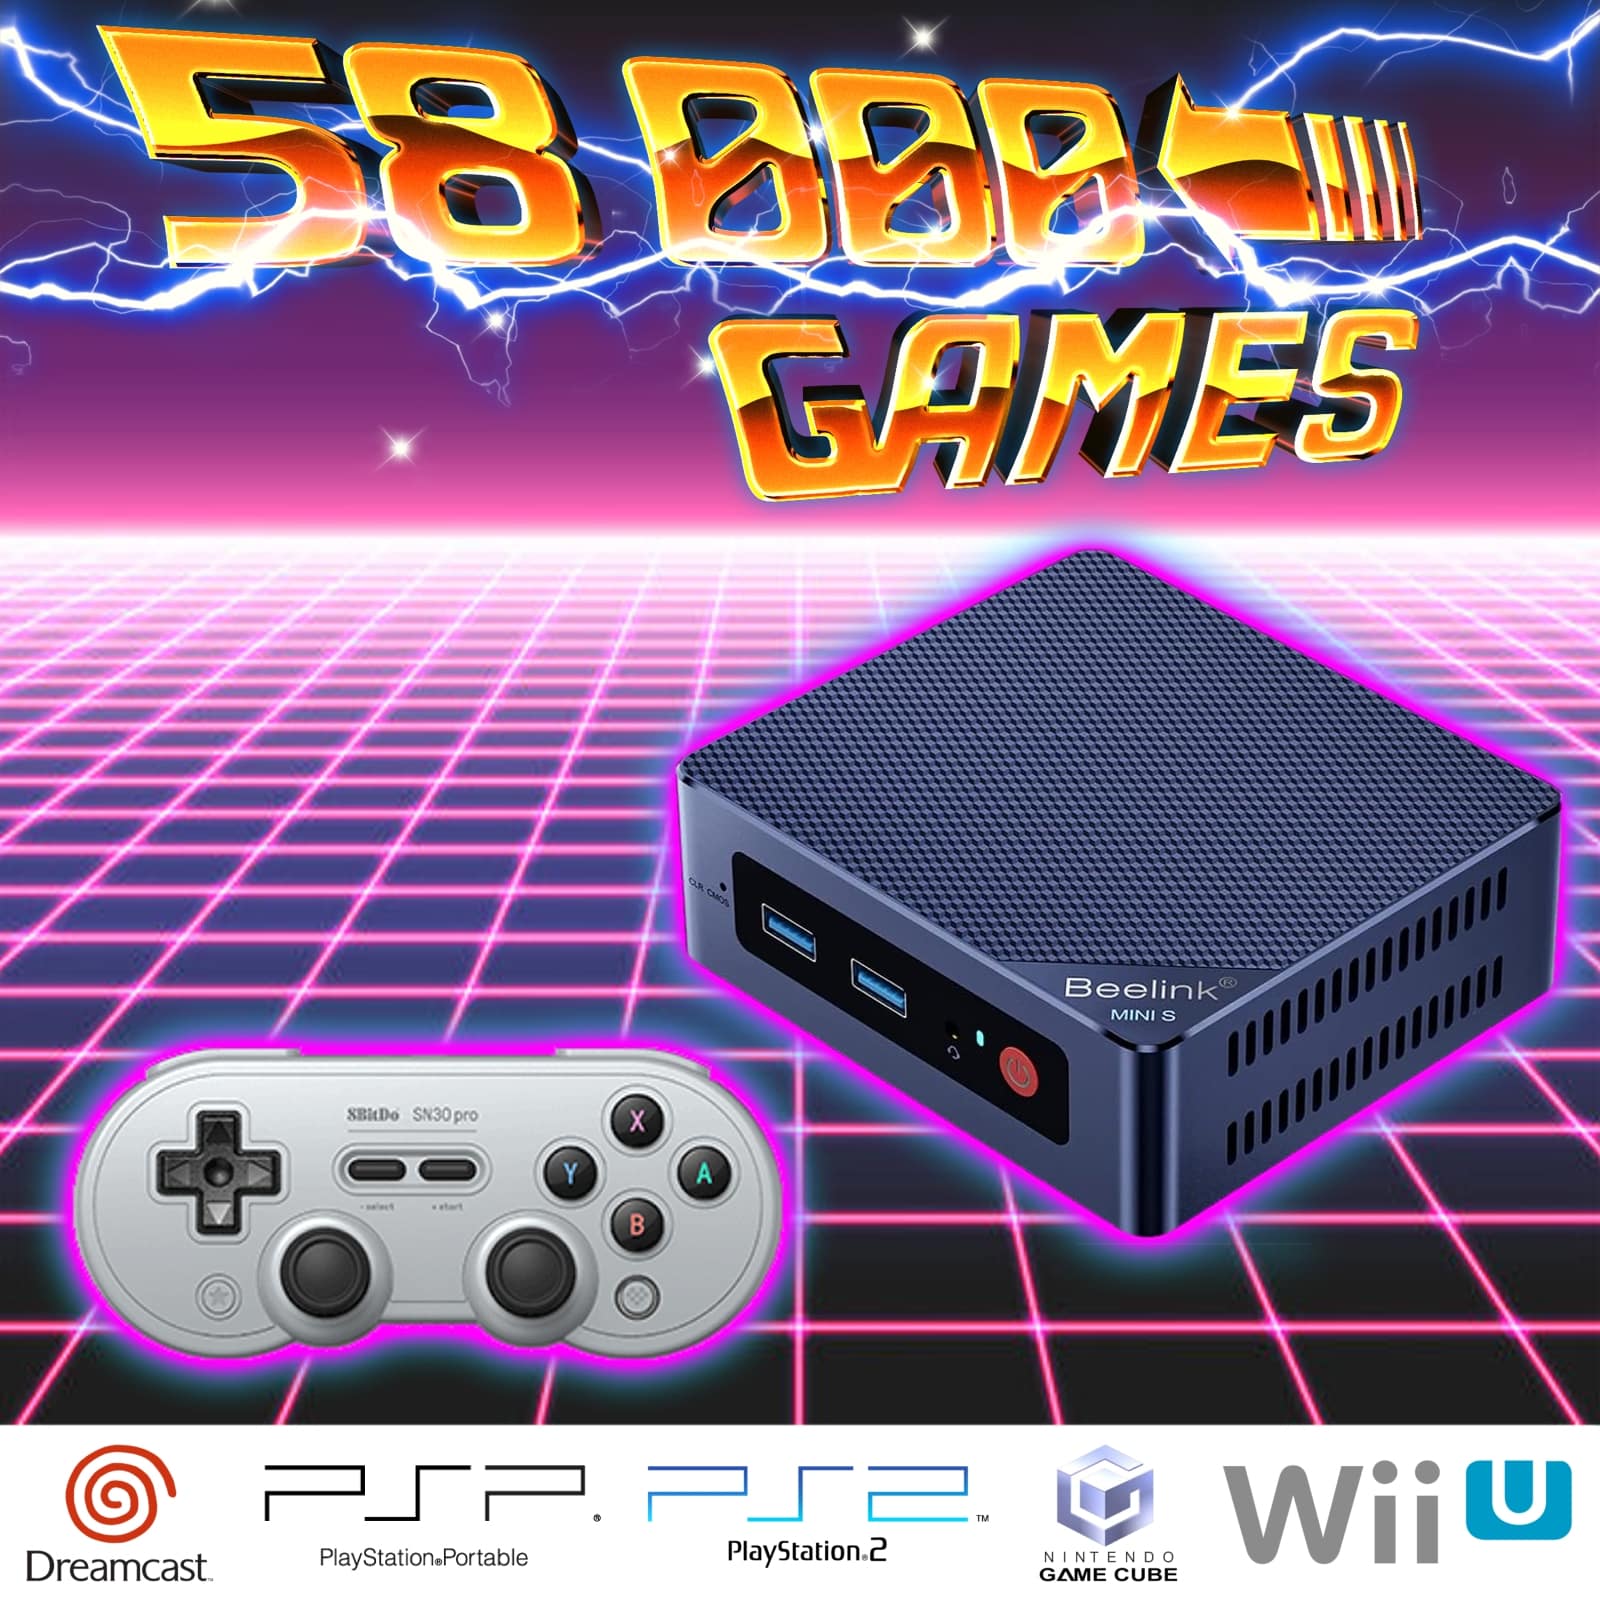 Retrobox 2 - Other consoles and Games